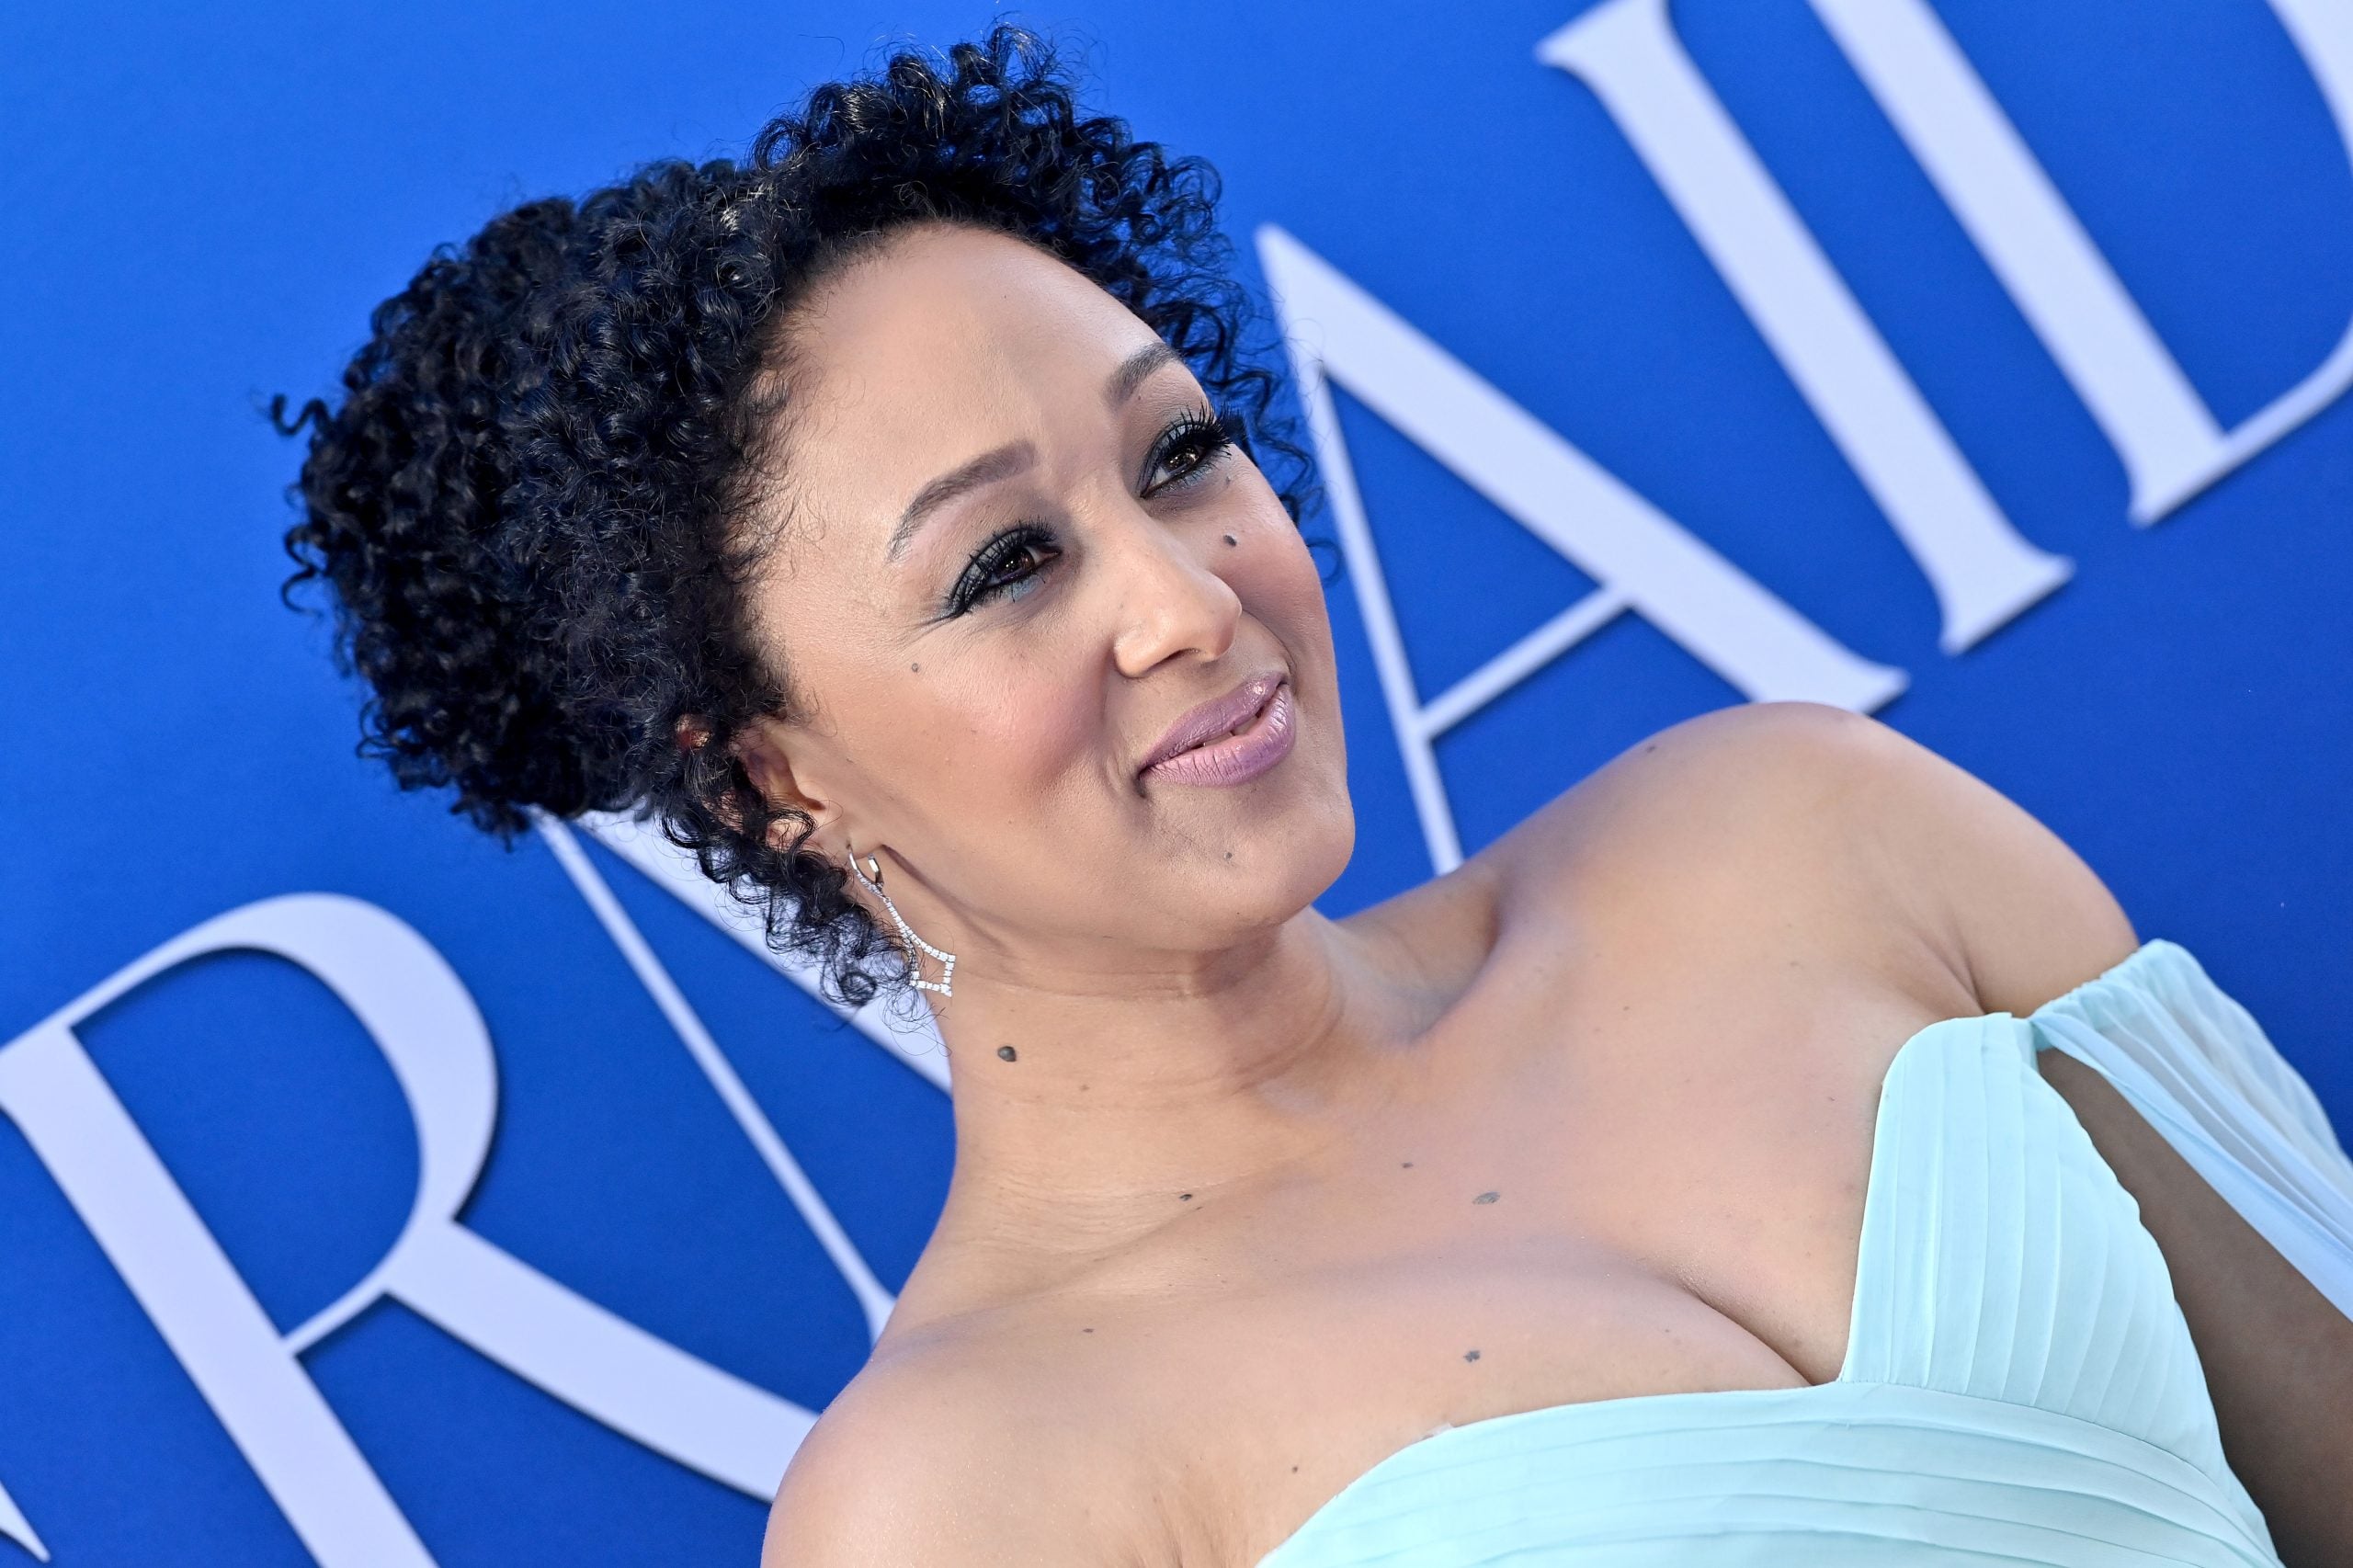 ‘A Perfect Mom Does Not Exist’: Tamera Mowry-Housley On Parenthood And Practicing Unconventional Self-Care